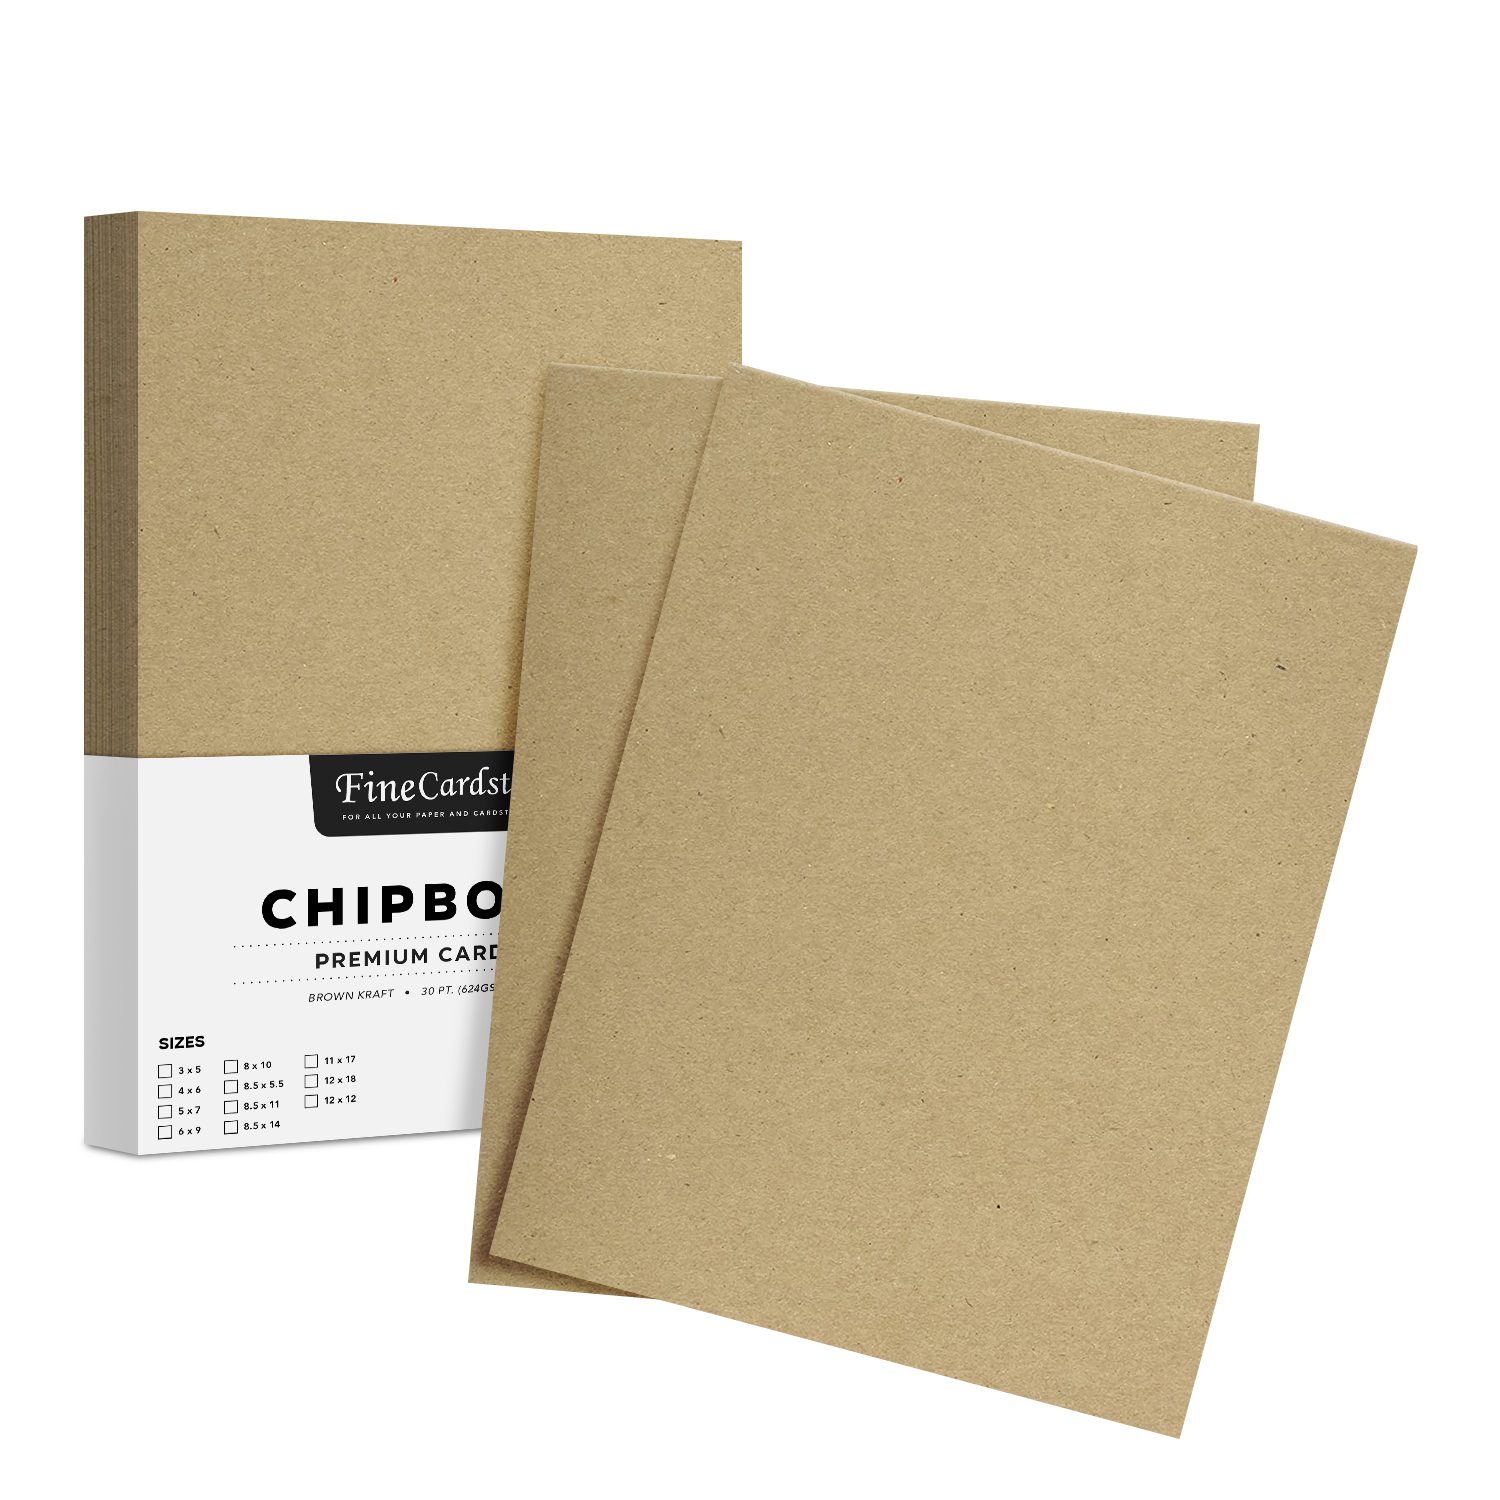 25 Sheets Chipboard 30 PT (Point) | Medium Weight Scrapbook Sheets | Brown Kraft Cardboard | 25 Sheets per Pack | 8.5 x 11 Inches